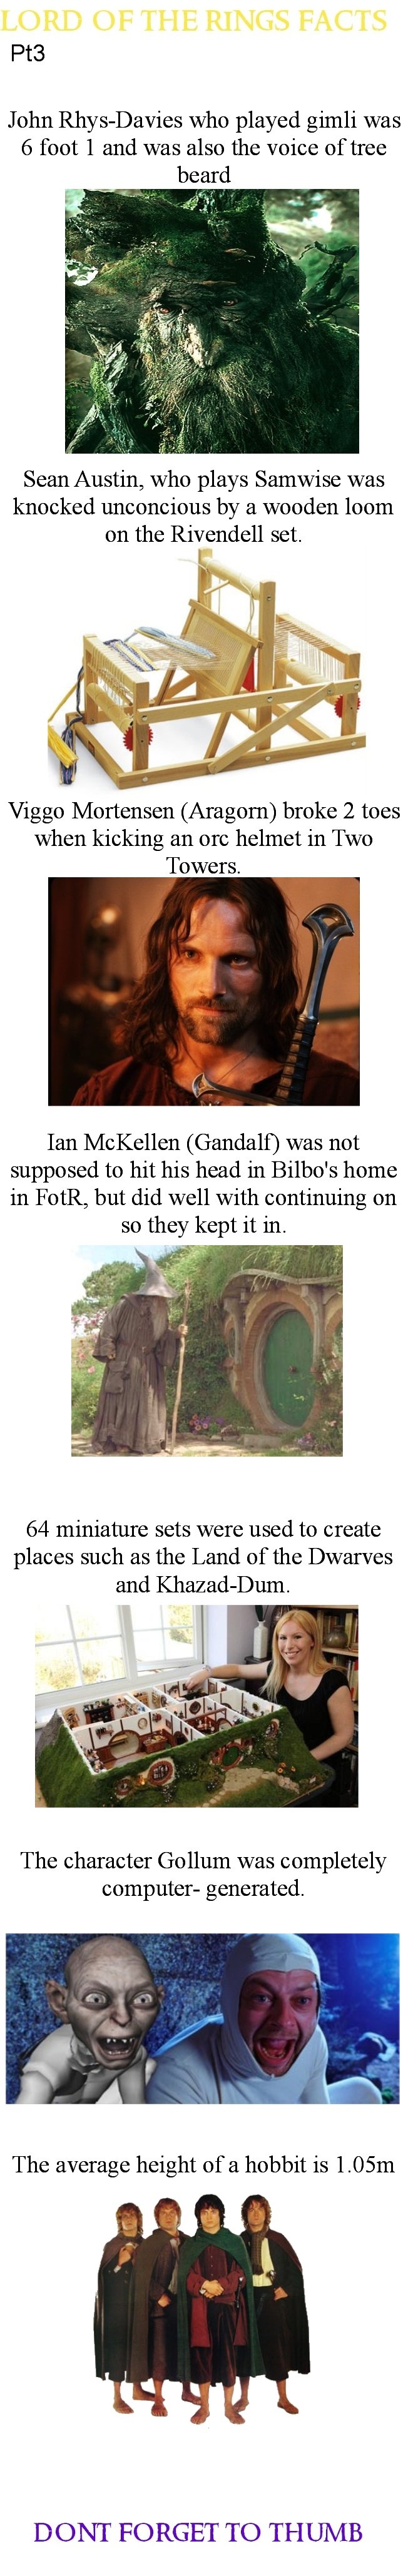 lord of the rings facts pt3